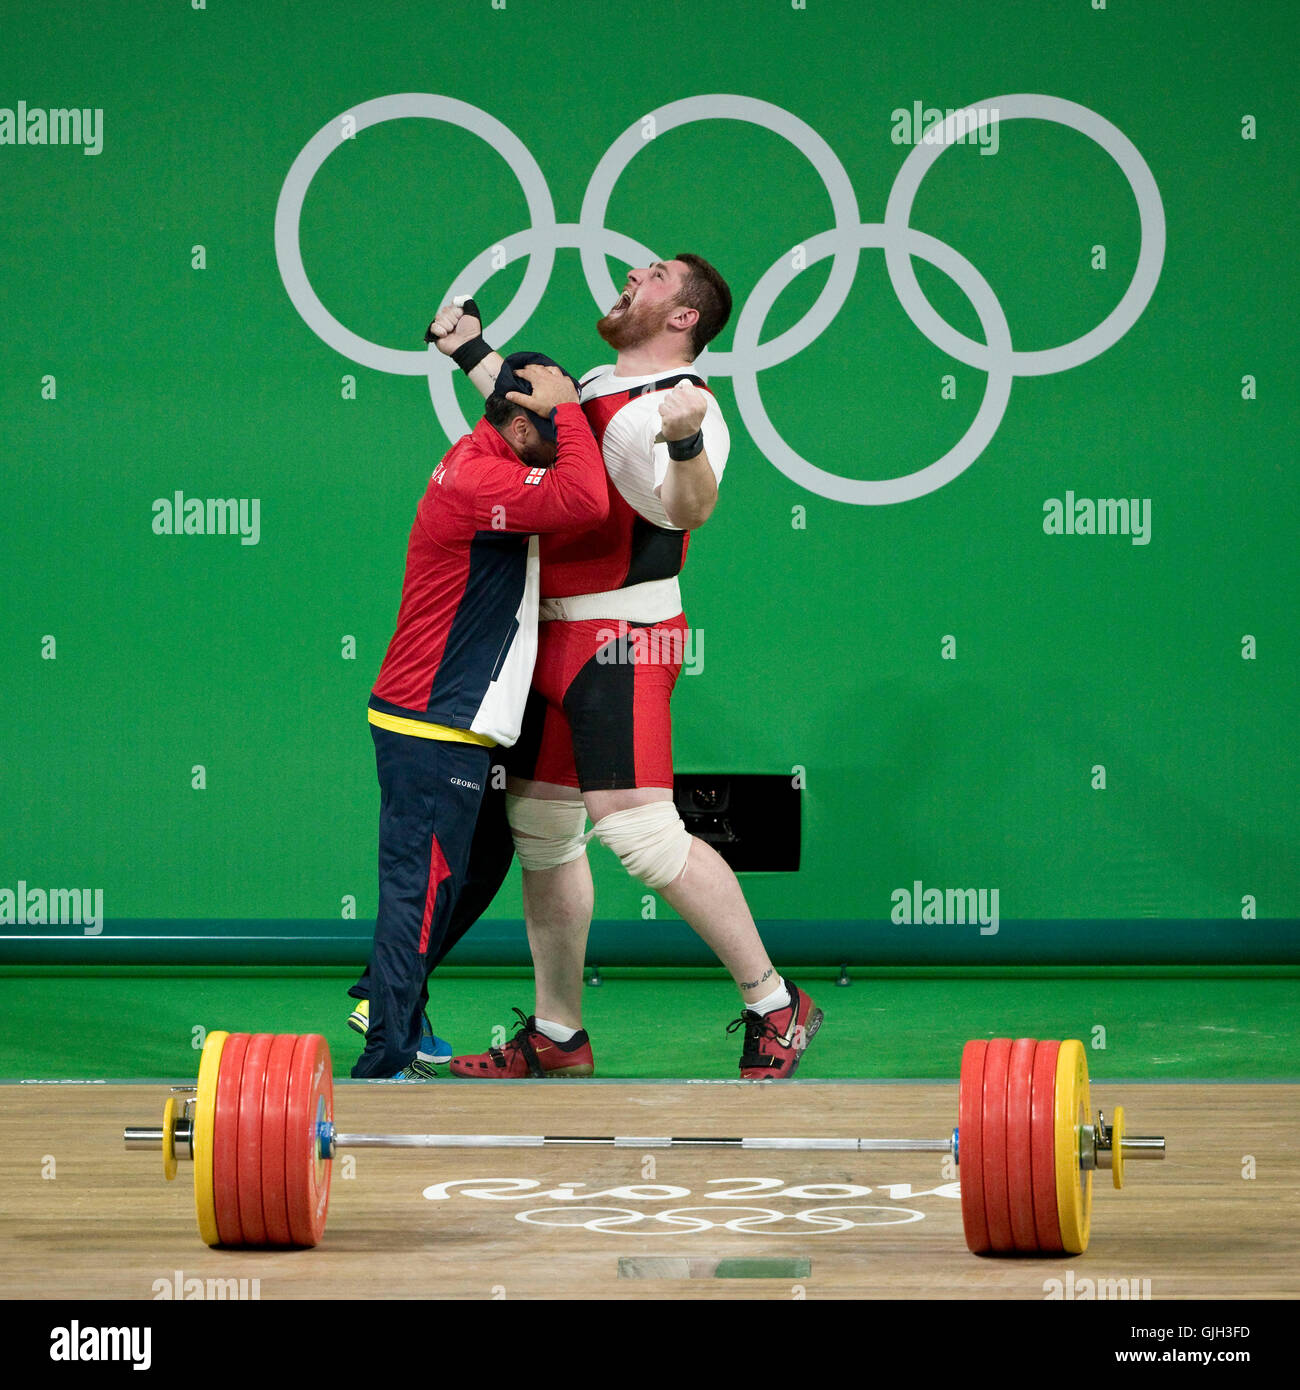 Rio de Janeiro, Brazil. 16th Aug, 2016. LASHA TALAKHADZE of Georgia celebrates after setting a world record for total weight lifted (473kg), winning gold in the men's  105kg weightlifting final at the Rio 2016 Summer Olympic Games. Credit:  Paul Kitagaki Jr./ZUMA Wire/Alamy Live News Stock Photo